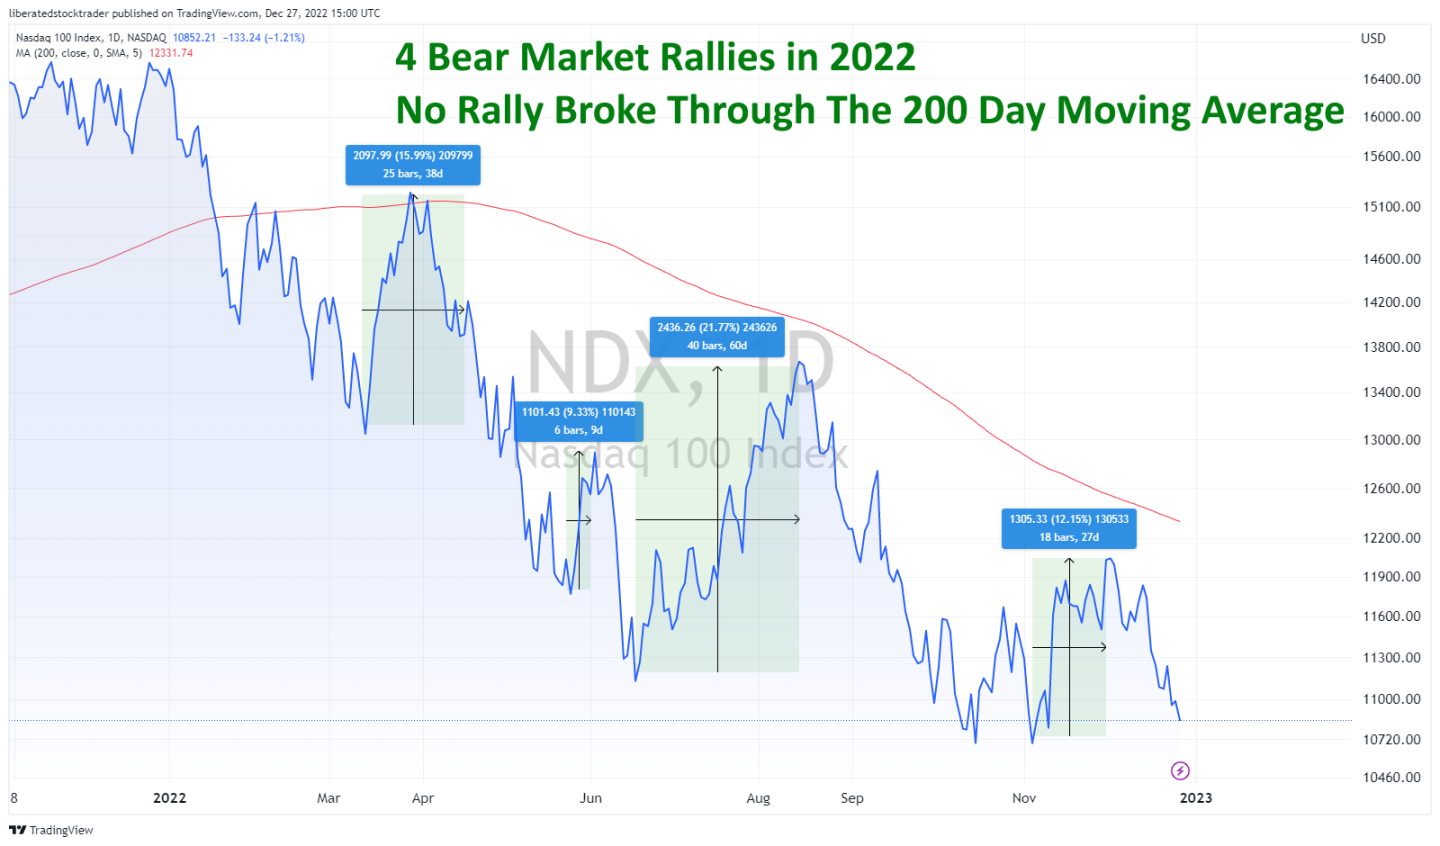 Bear Market Rallies: An Easy Way To Lose Money.